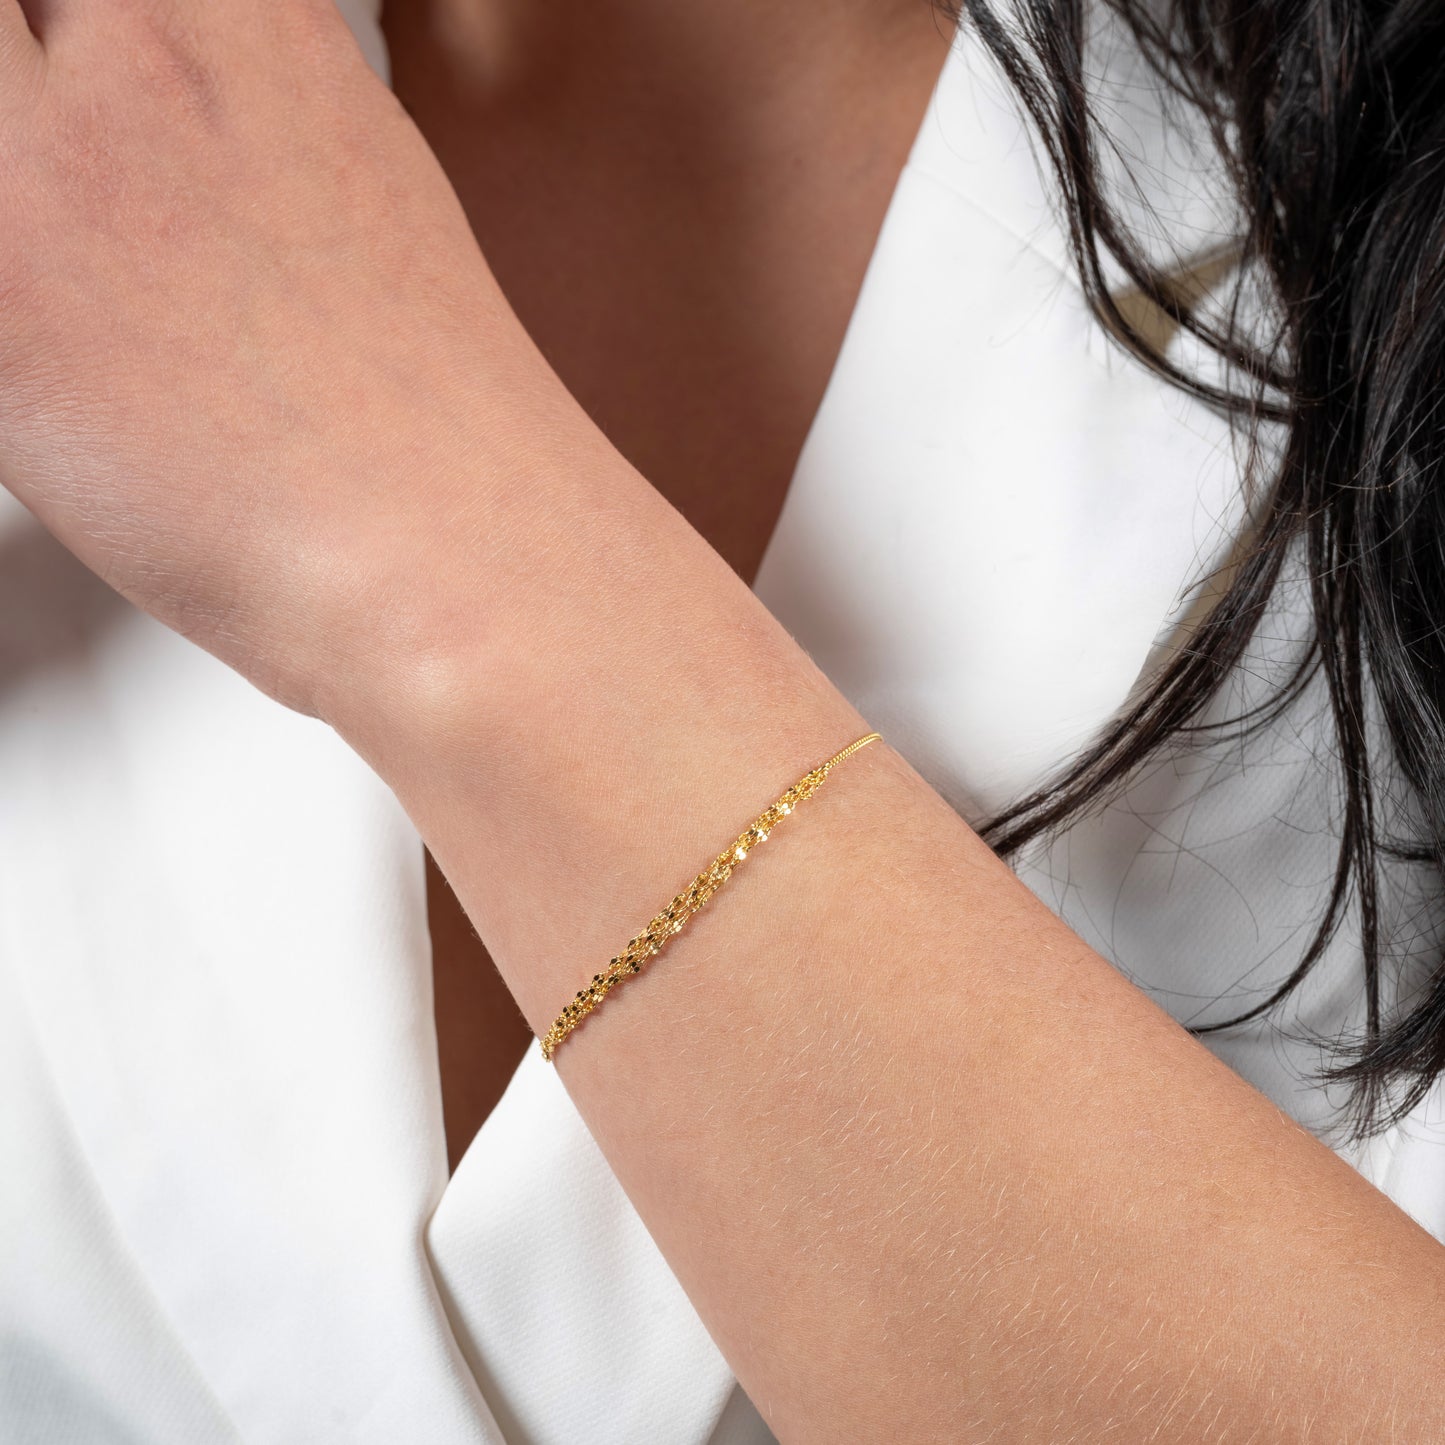 A model wearing Half Crumpled Gold Bracelet on her hand. Zoomed view.